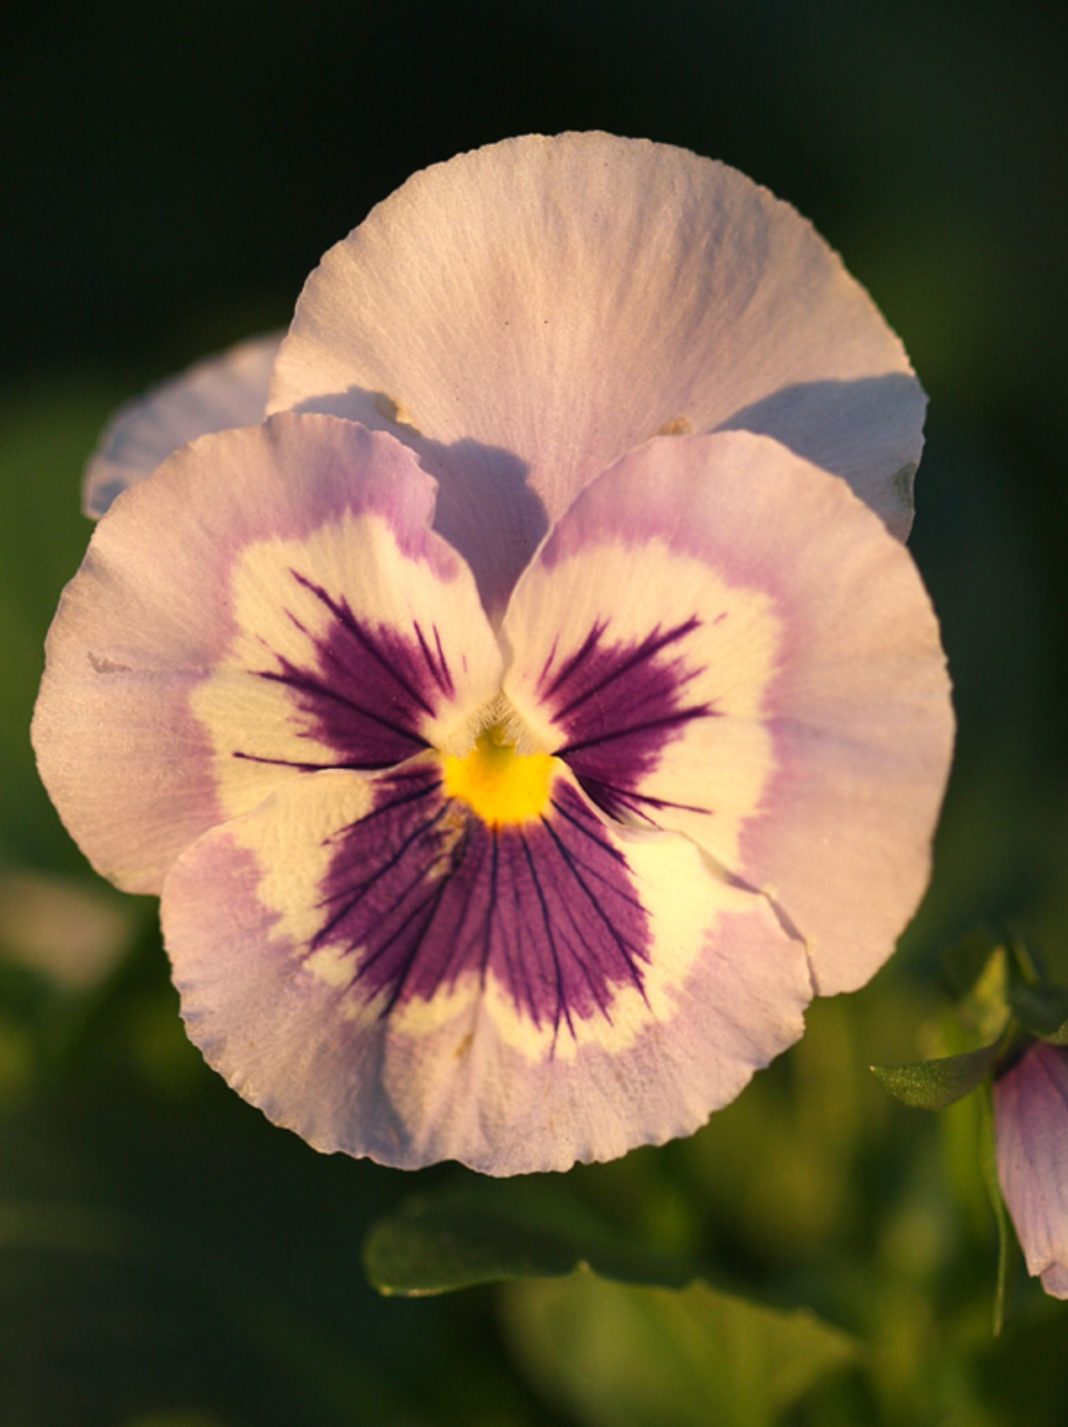 Winter flowering pansies give a beautiful pop of colour